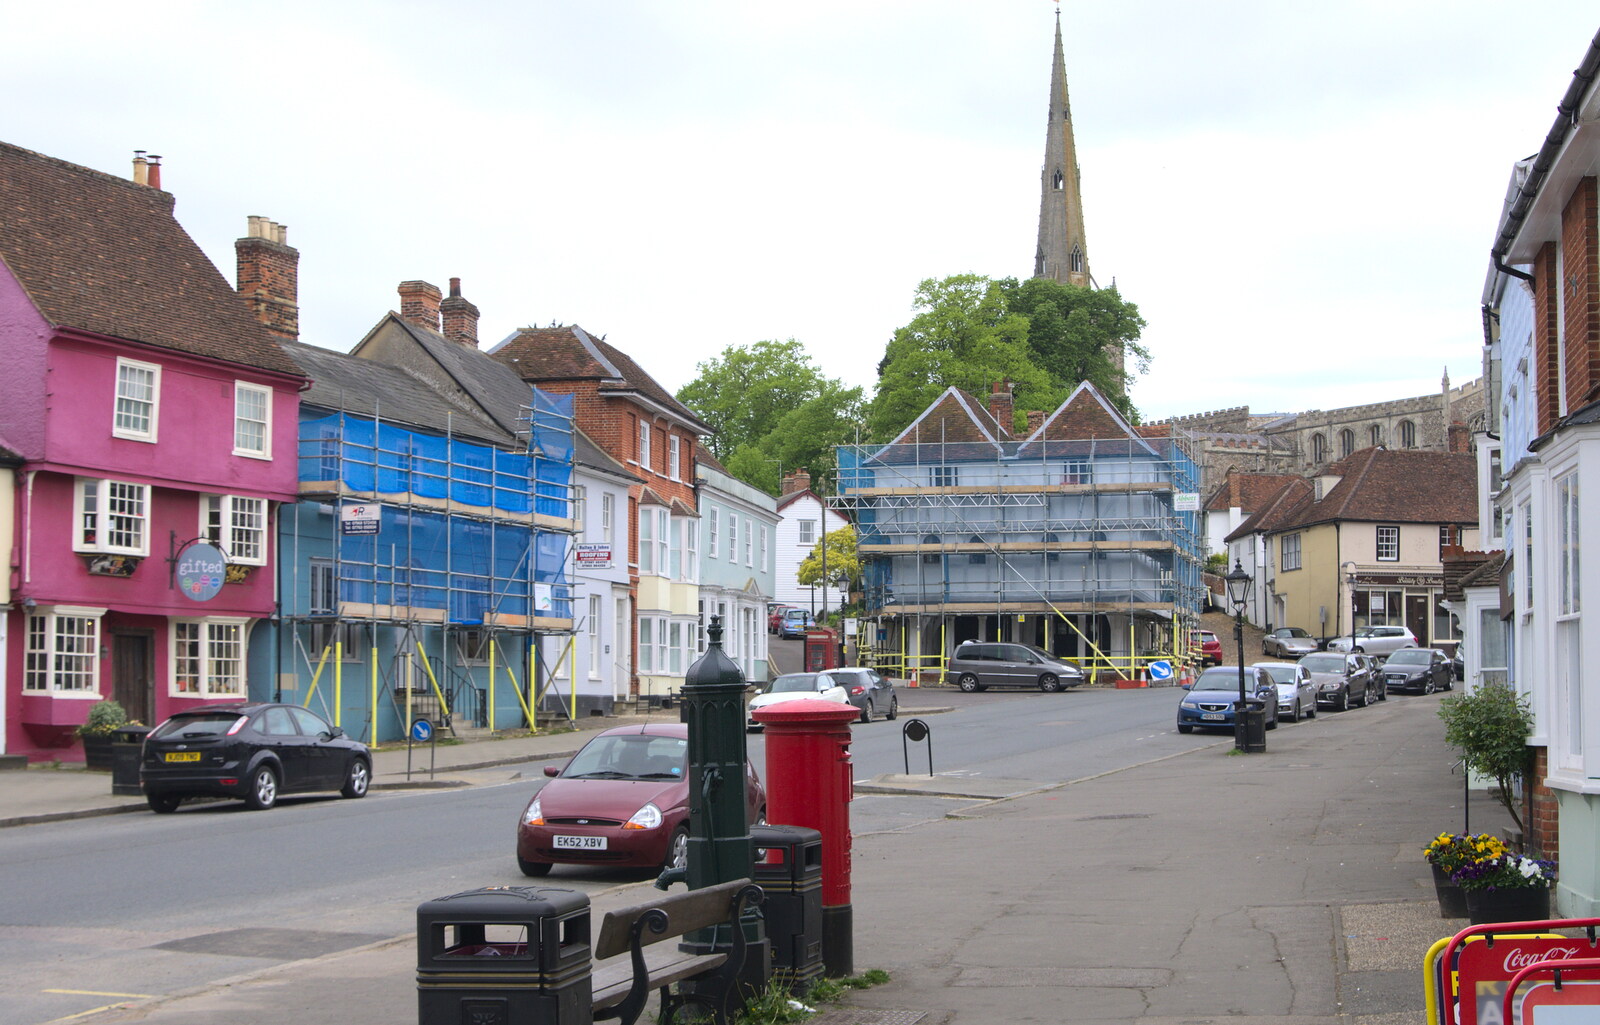 Thaxted is all scaffolding from A Postcard From Thaxted, Essex - 7th May 2017